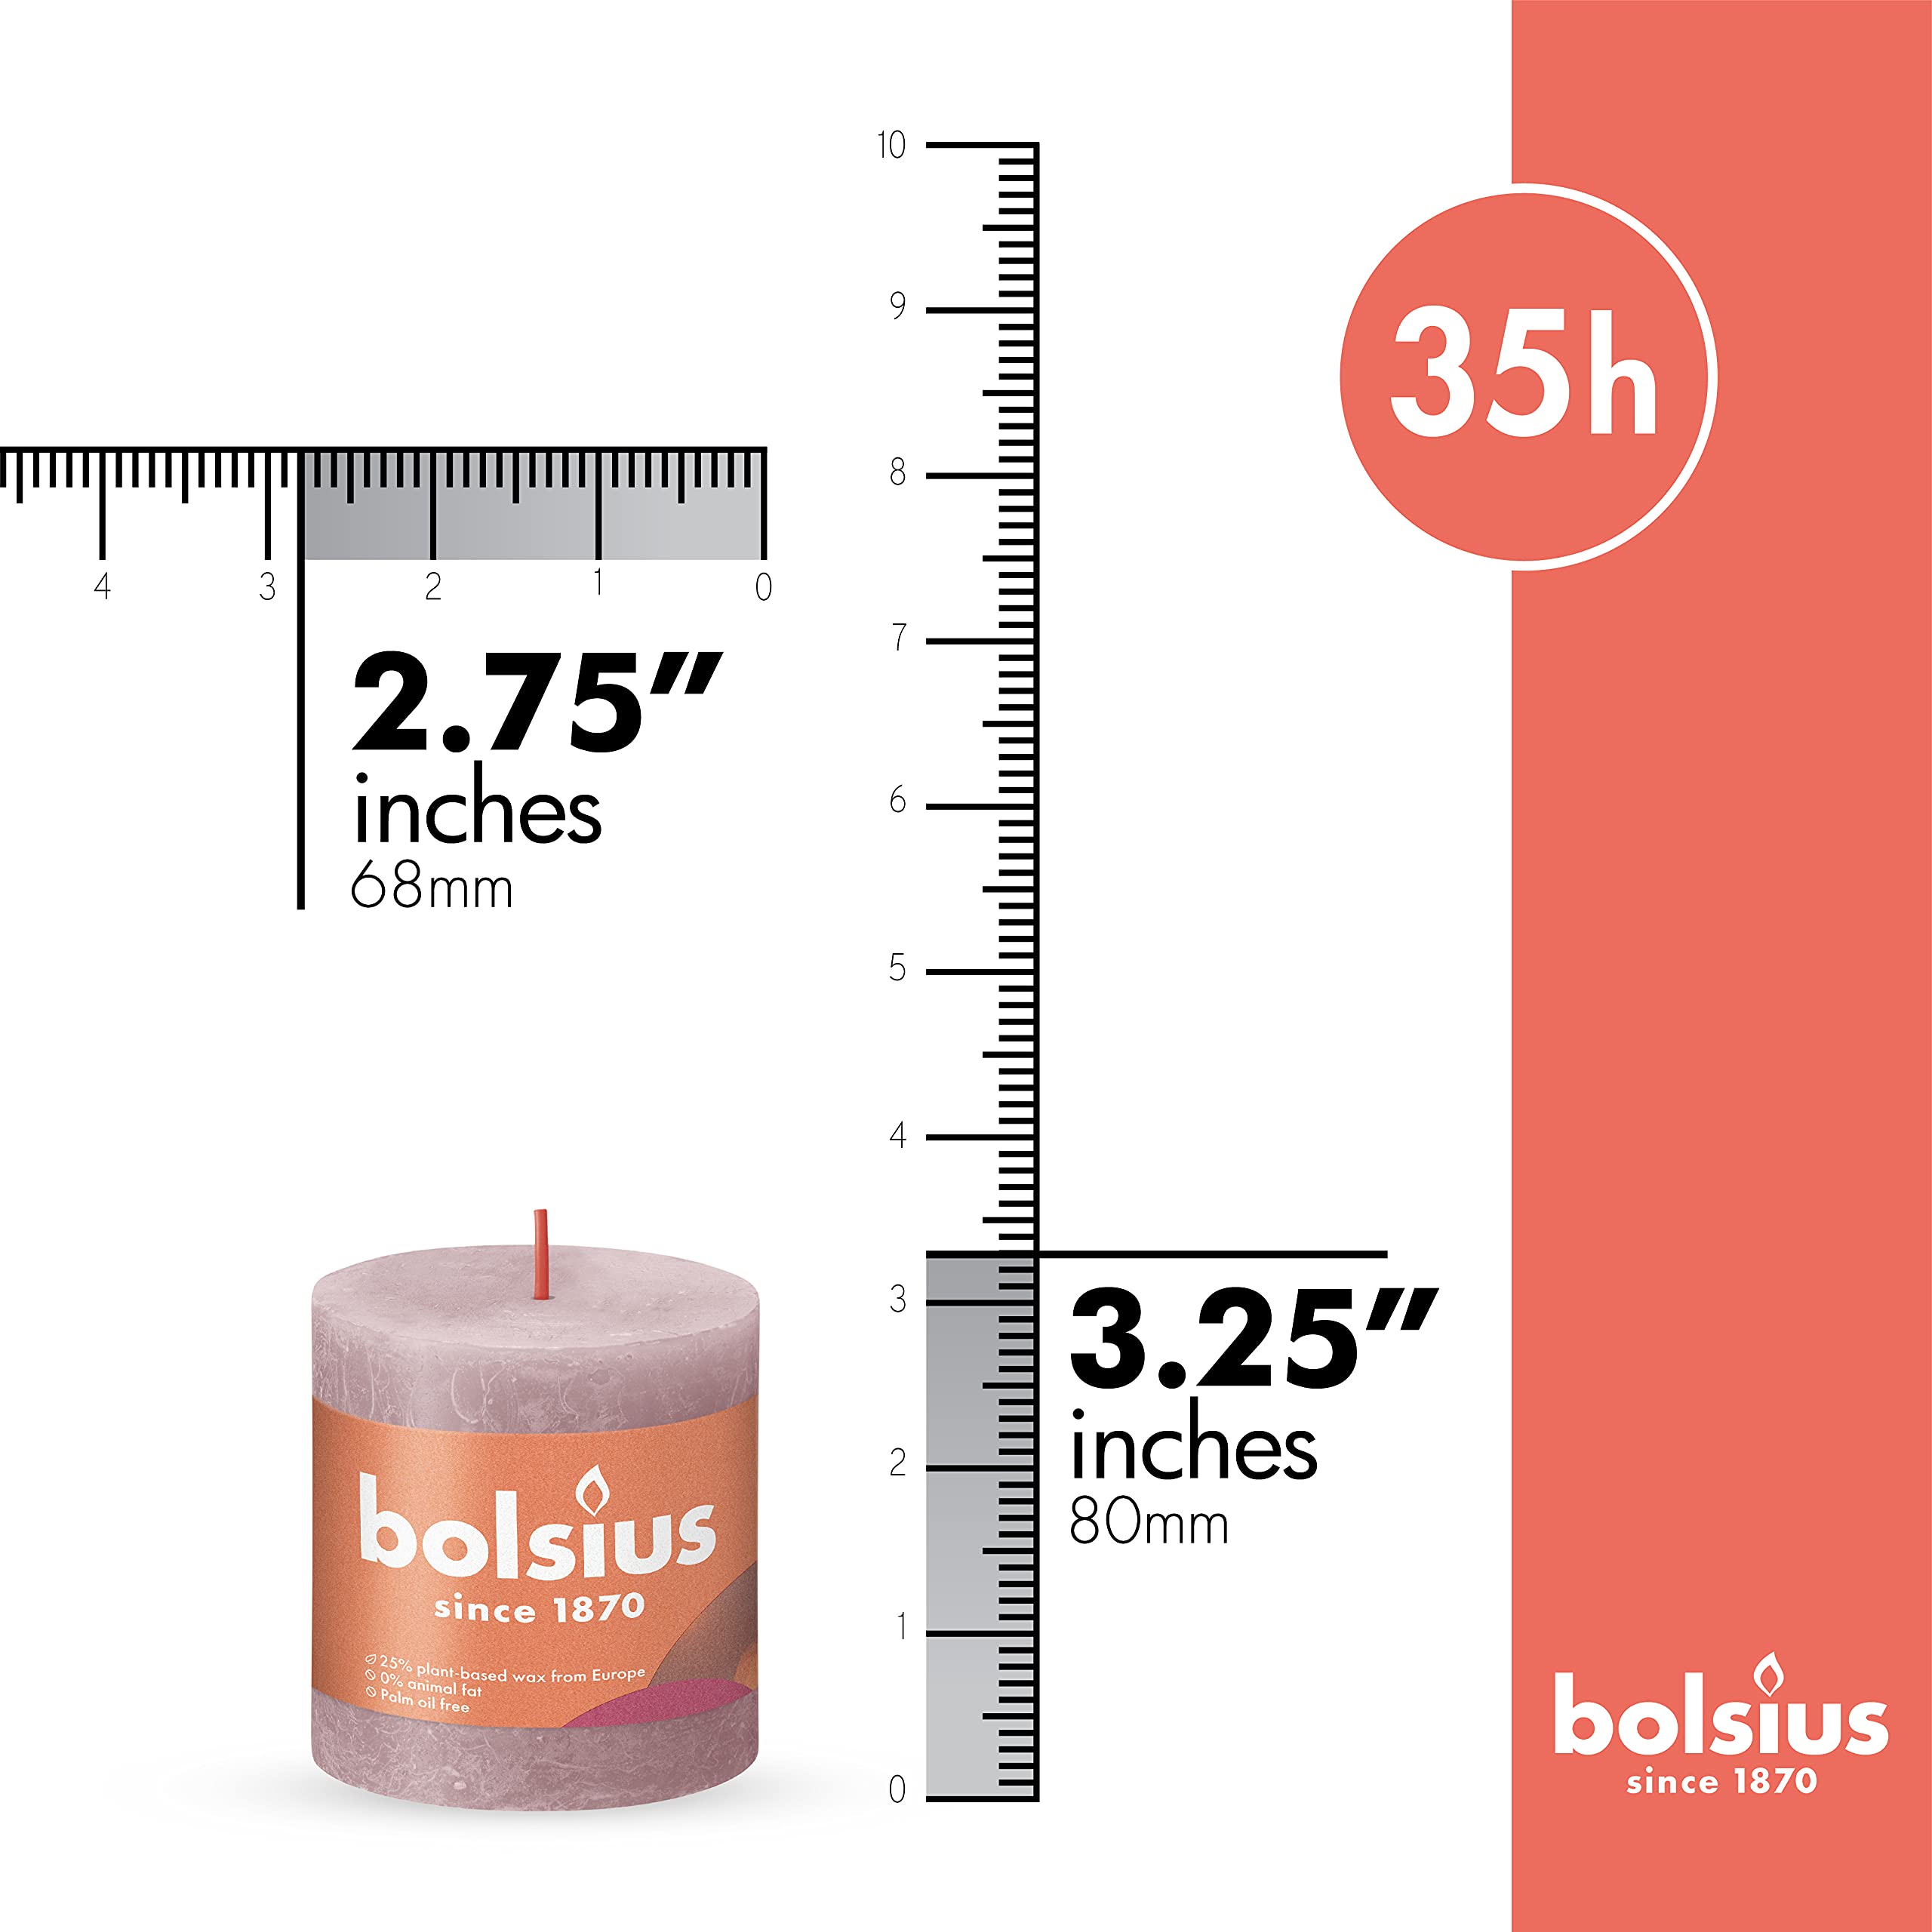 BOLSIUS Pillar Candles - Premium European Quality - Natural Eco-Friendly Plant-Based Wax - Unscented Dripless Smokeless 35 Hour Party and Wedding Candles  - Very Good